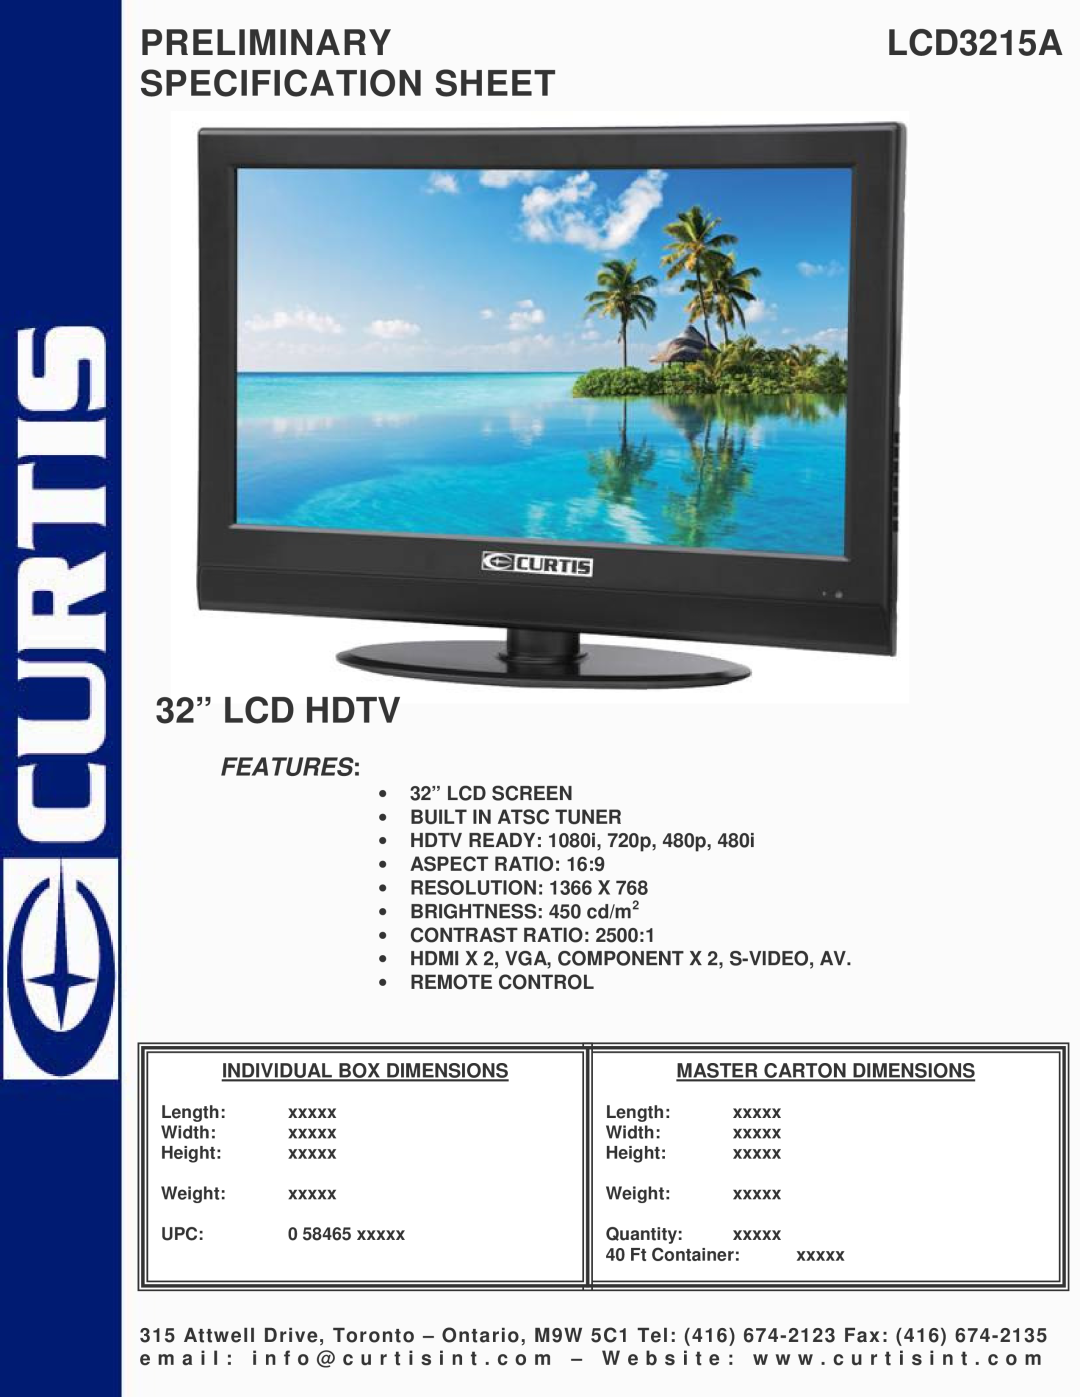 Curtis specifications PRELIMINARYLCD3215A SPECIFICATION SHEET 32” LCD HDTV, Features 